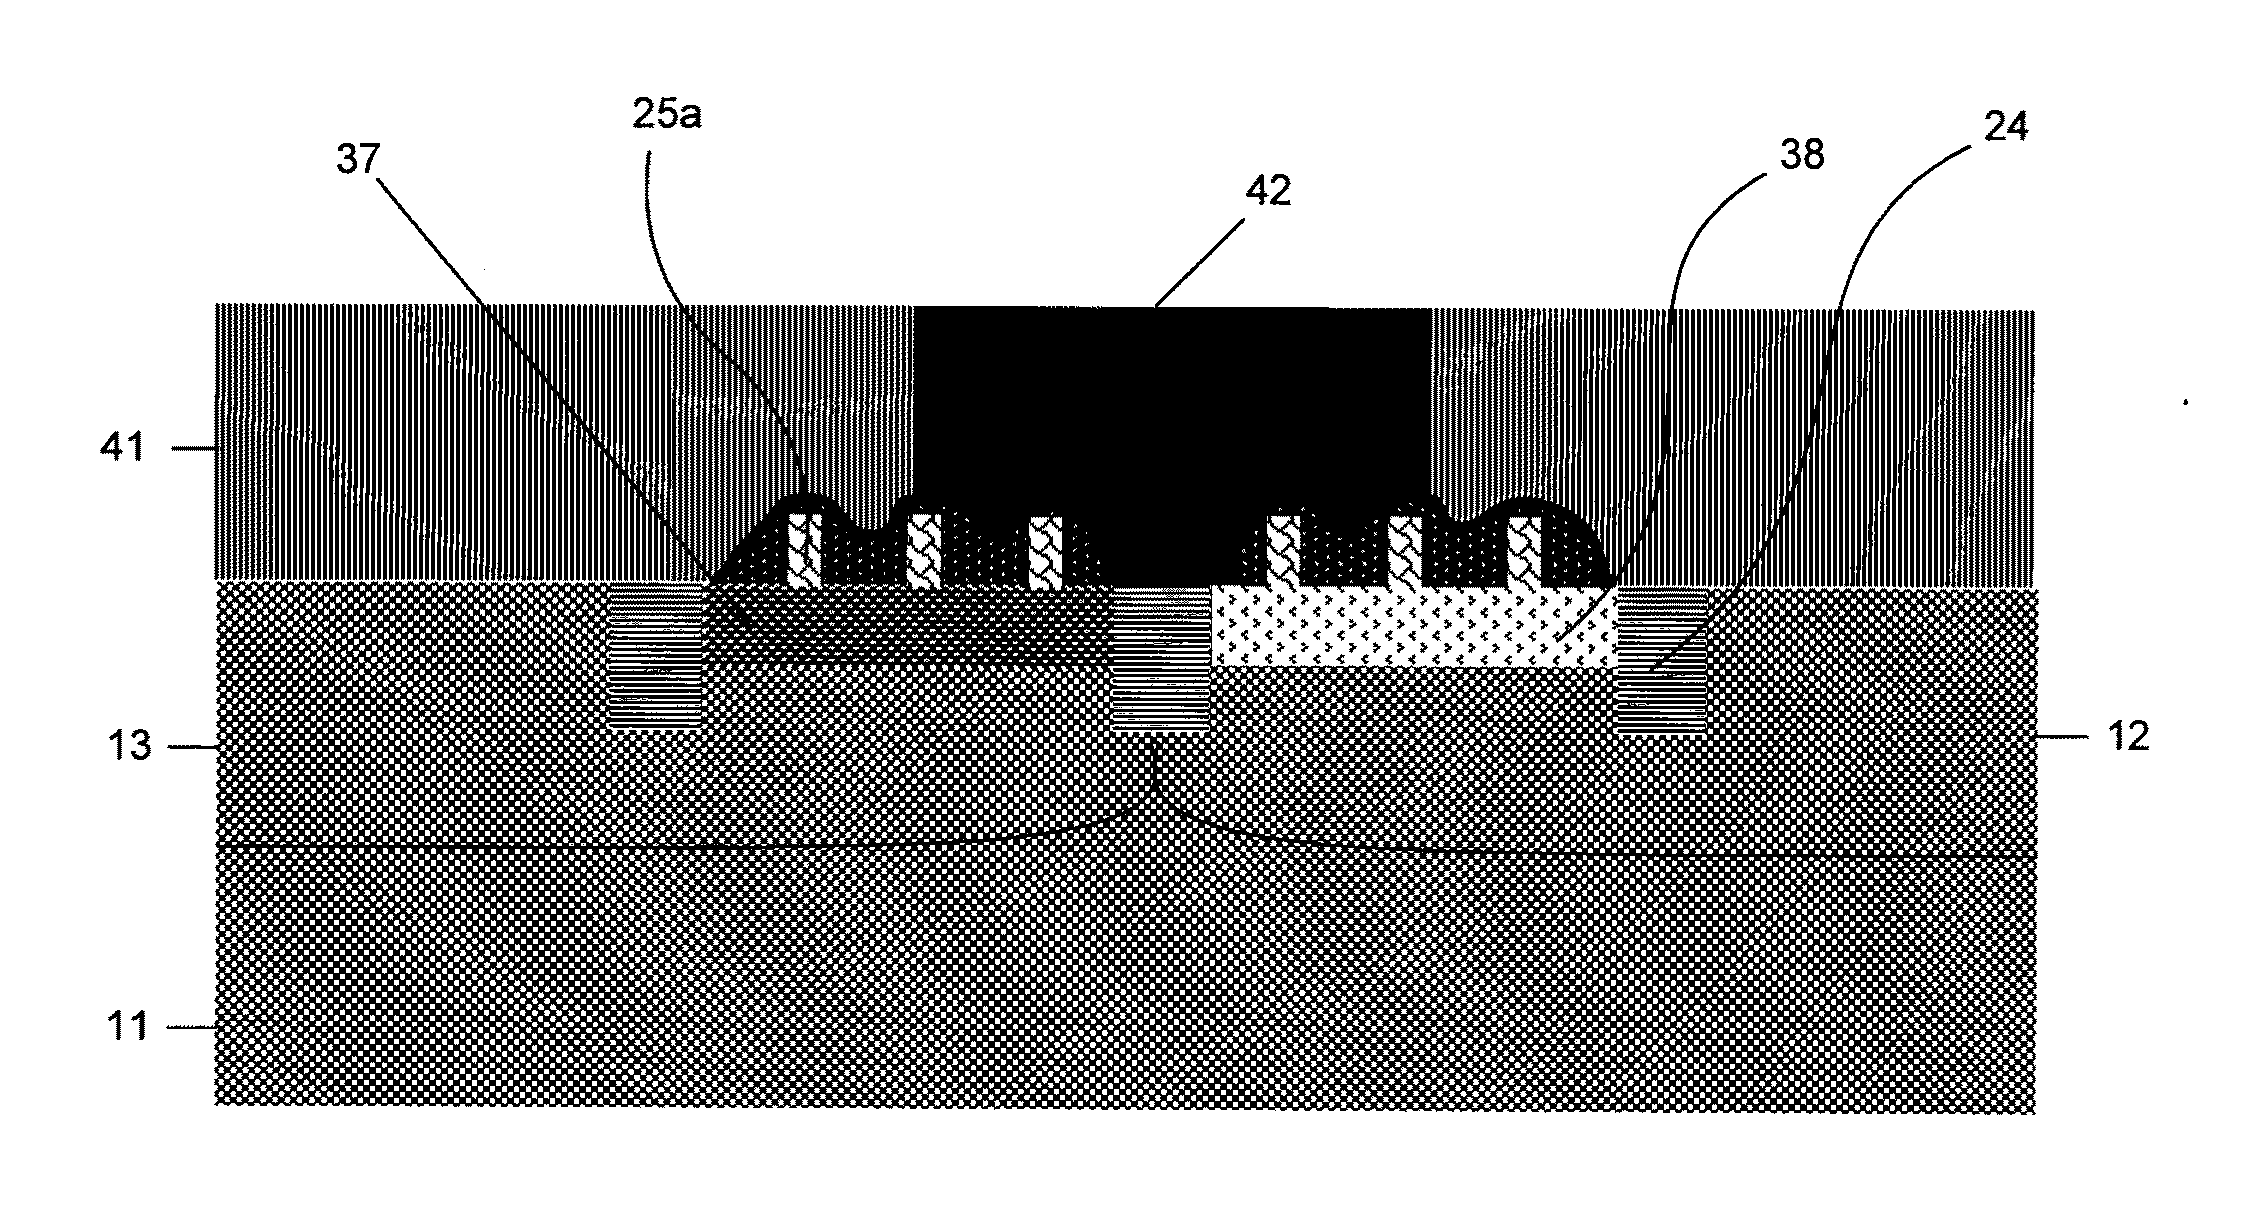 Process for Forming FINS for a FinFET Device